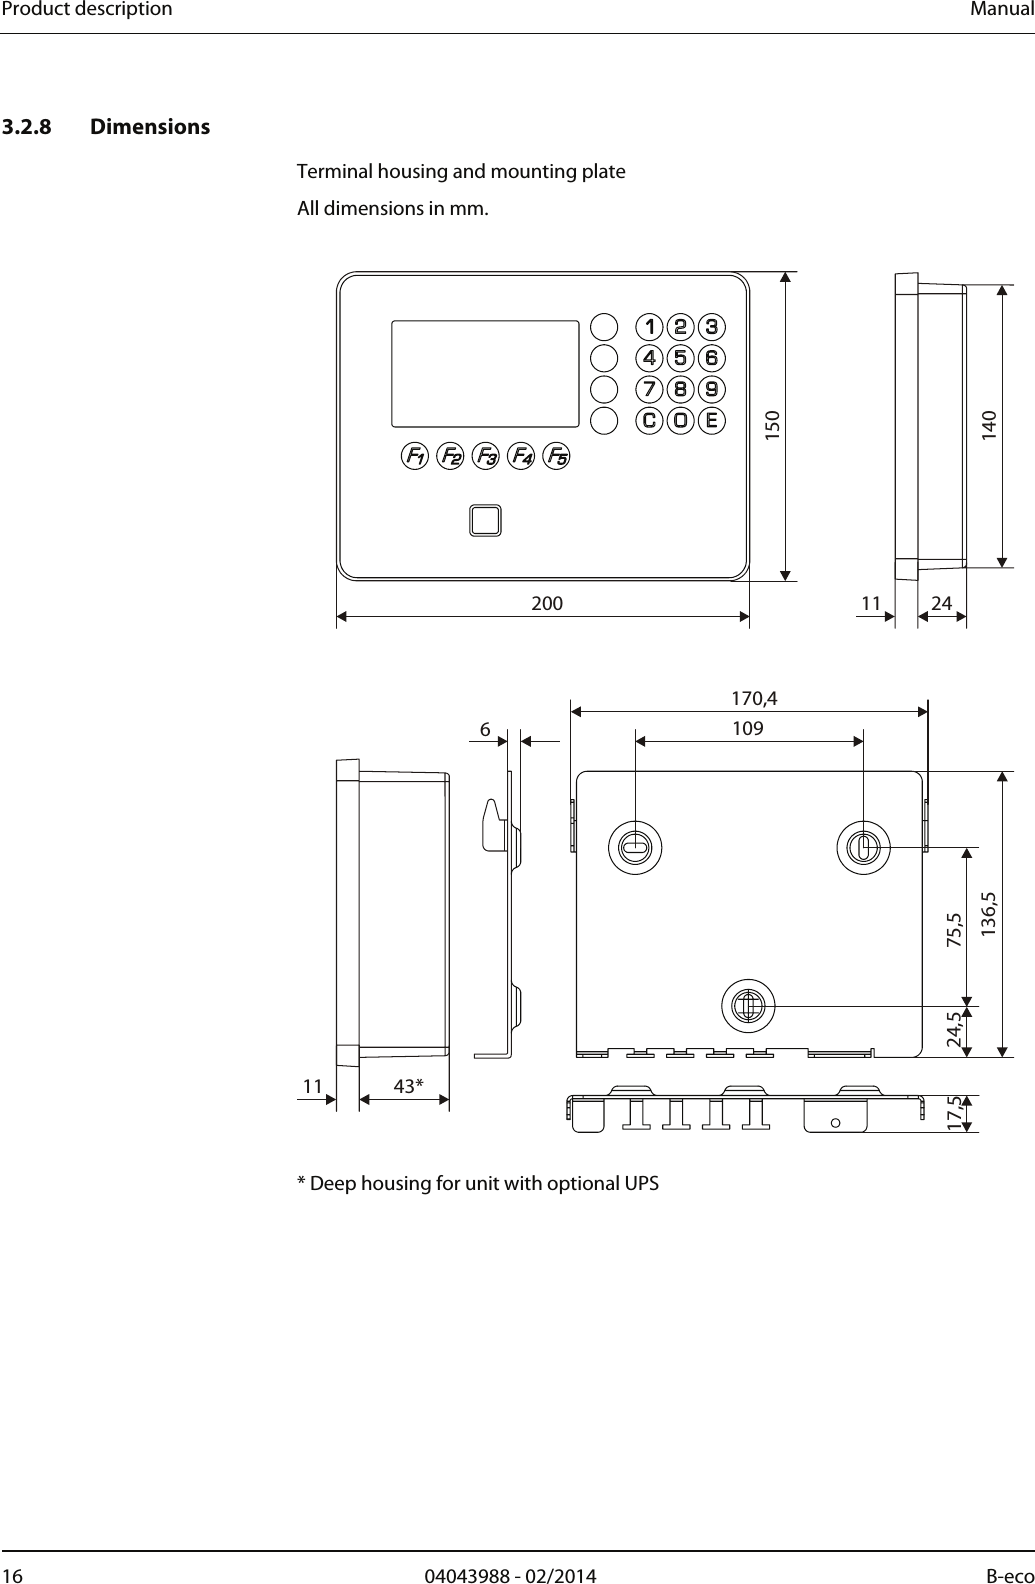 Product description  Manual 16  04043988 - 02/2014  B-eco   3.2.8 Dimensions Terminal housing and mounting plate All dimensions in mm.  200 11112443*15014075,5136,5109170,4617,5 24,5  * Deep housing for unit with optional UPS 